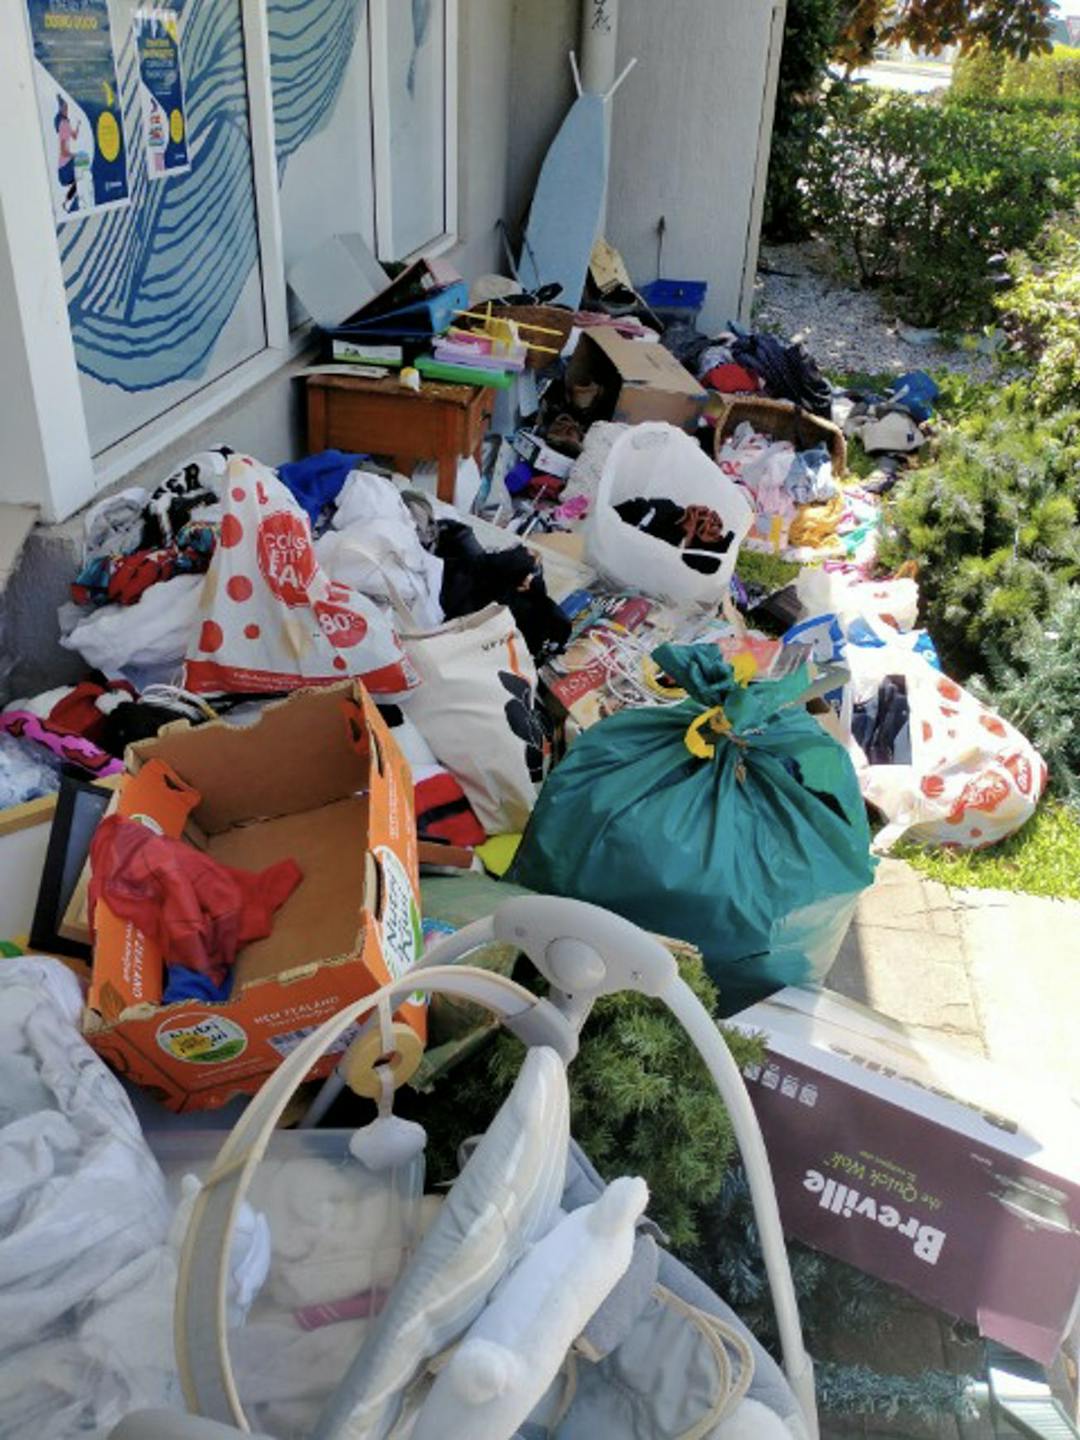 Donations dumped infront of Vinnies store